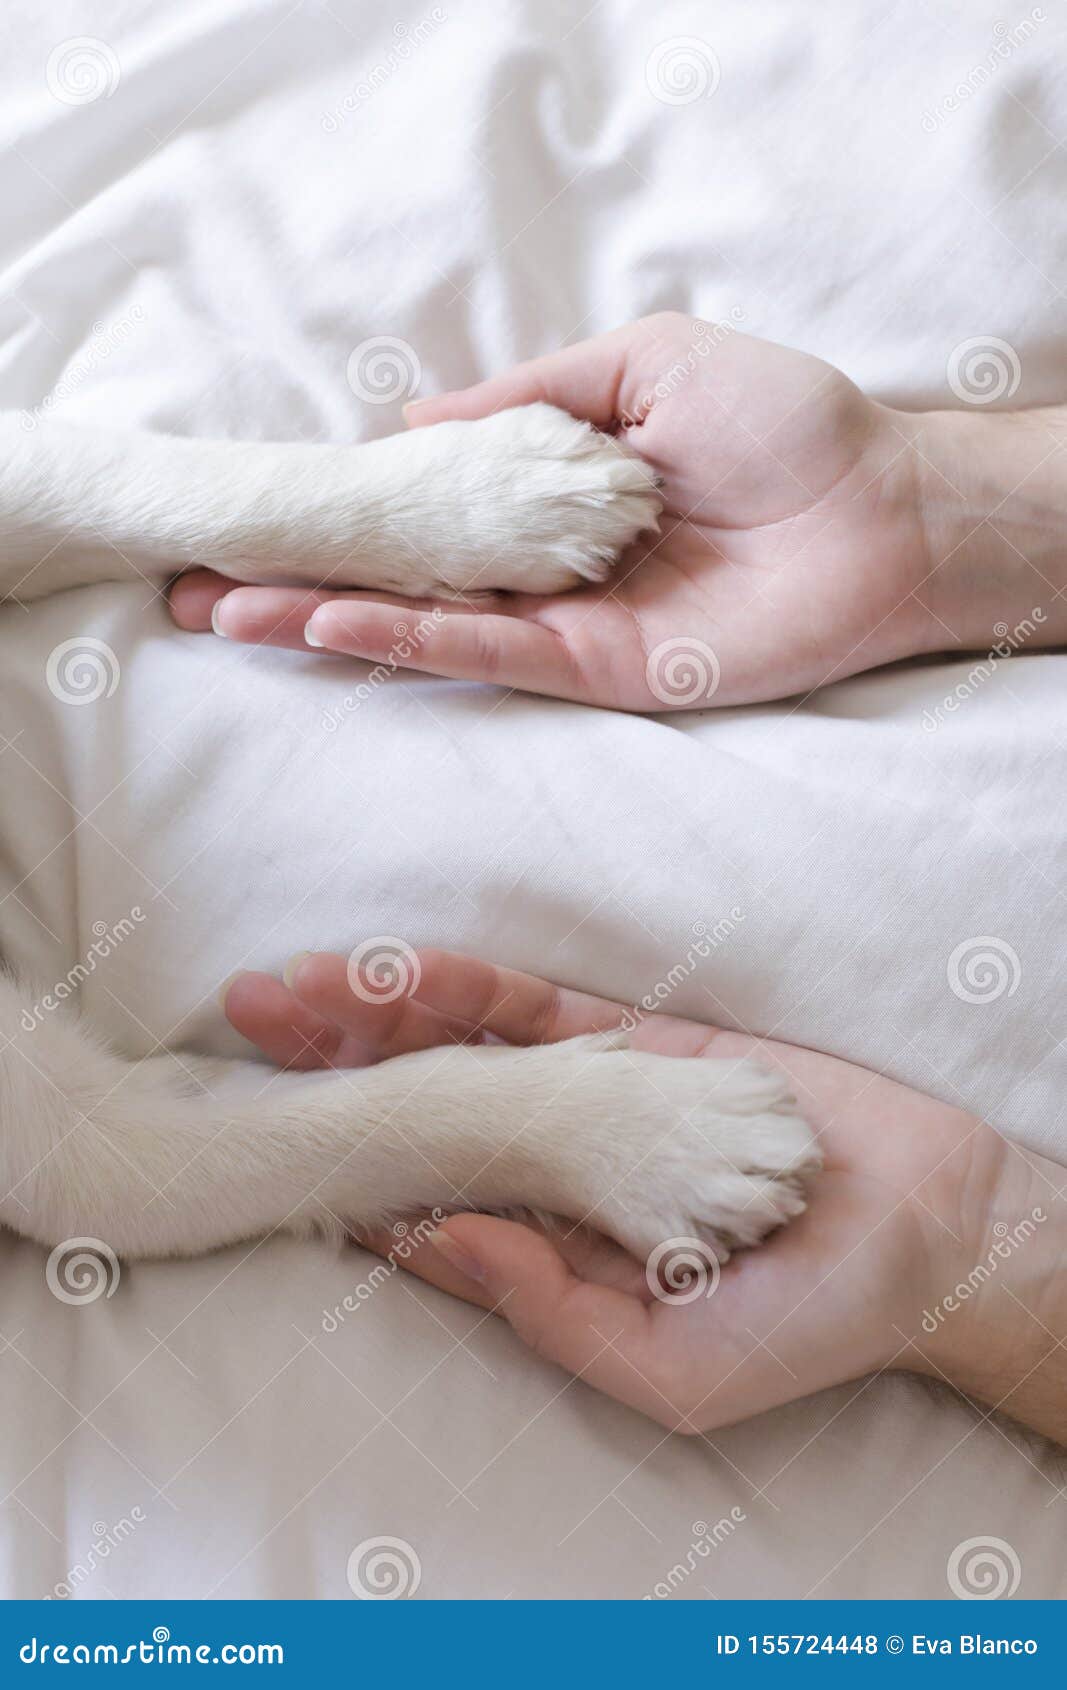 woman hands touching her dog paws on white sheet on bed. morning, love for animals concept. home, indoors and lifestyle